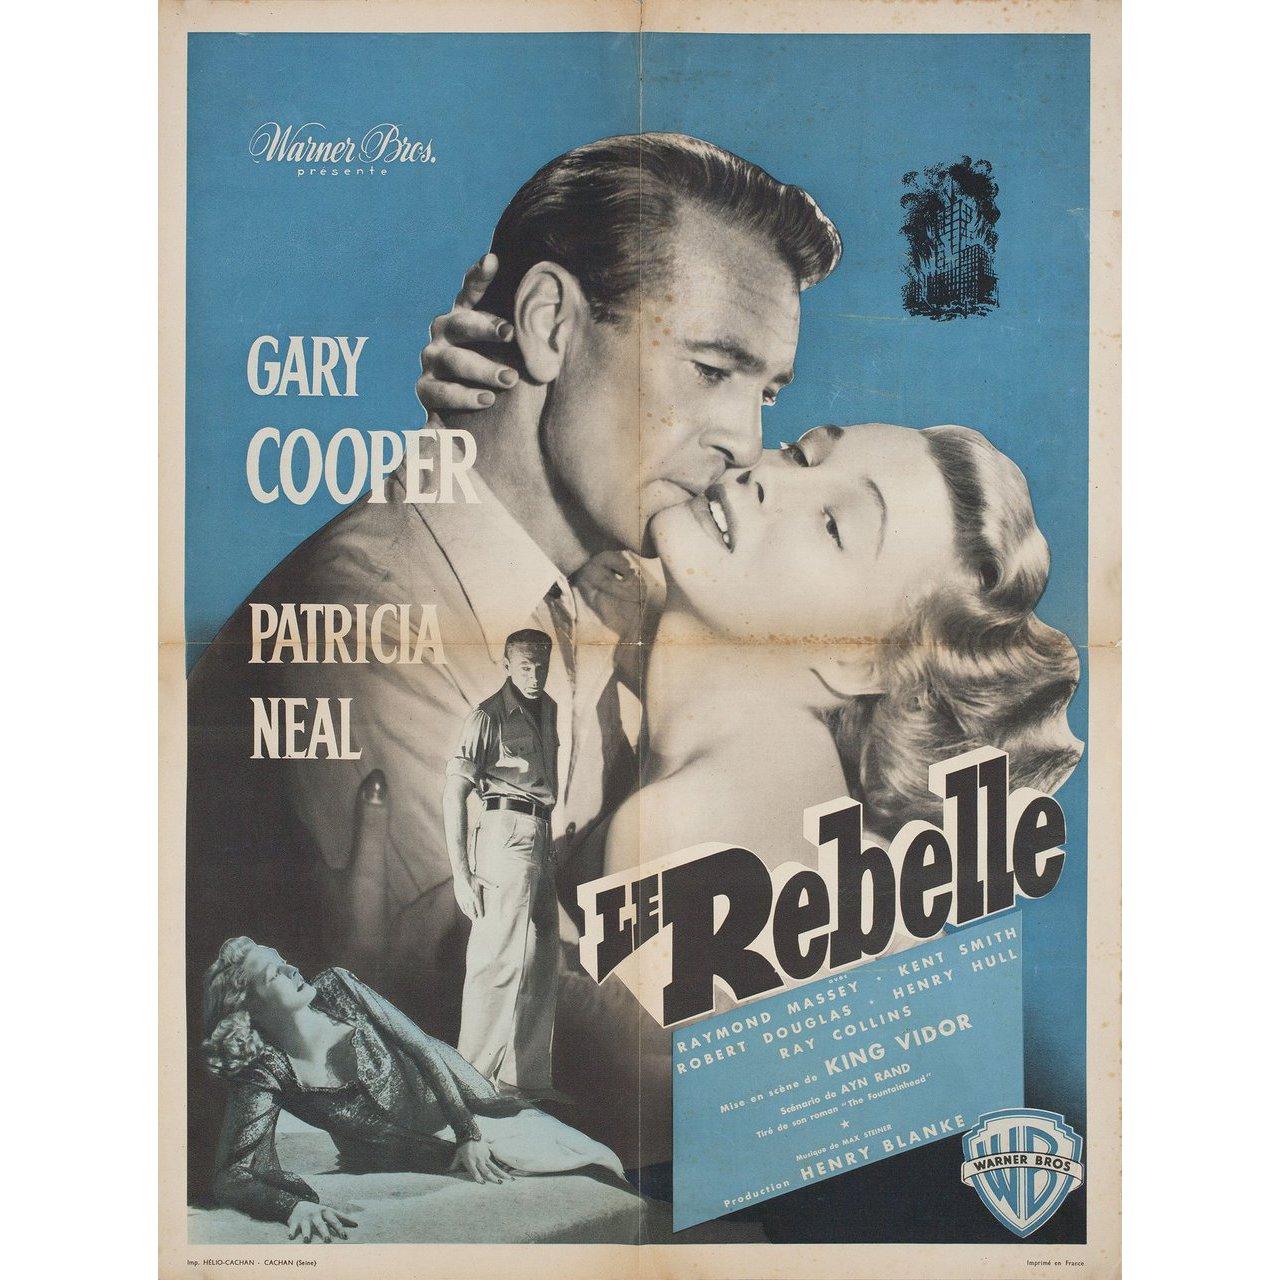 Original 1949 French moyenne poster for the film The Fountainhead directed by King Vidor with Gary Cooper / Patricia Neal / Raymond Massey / Kent Smith. Good-Very Good condition, folded. Many original posters were issued folded or were subsequently